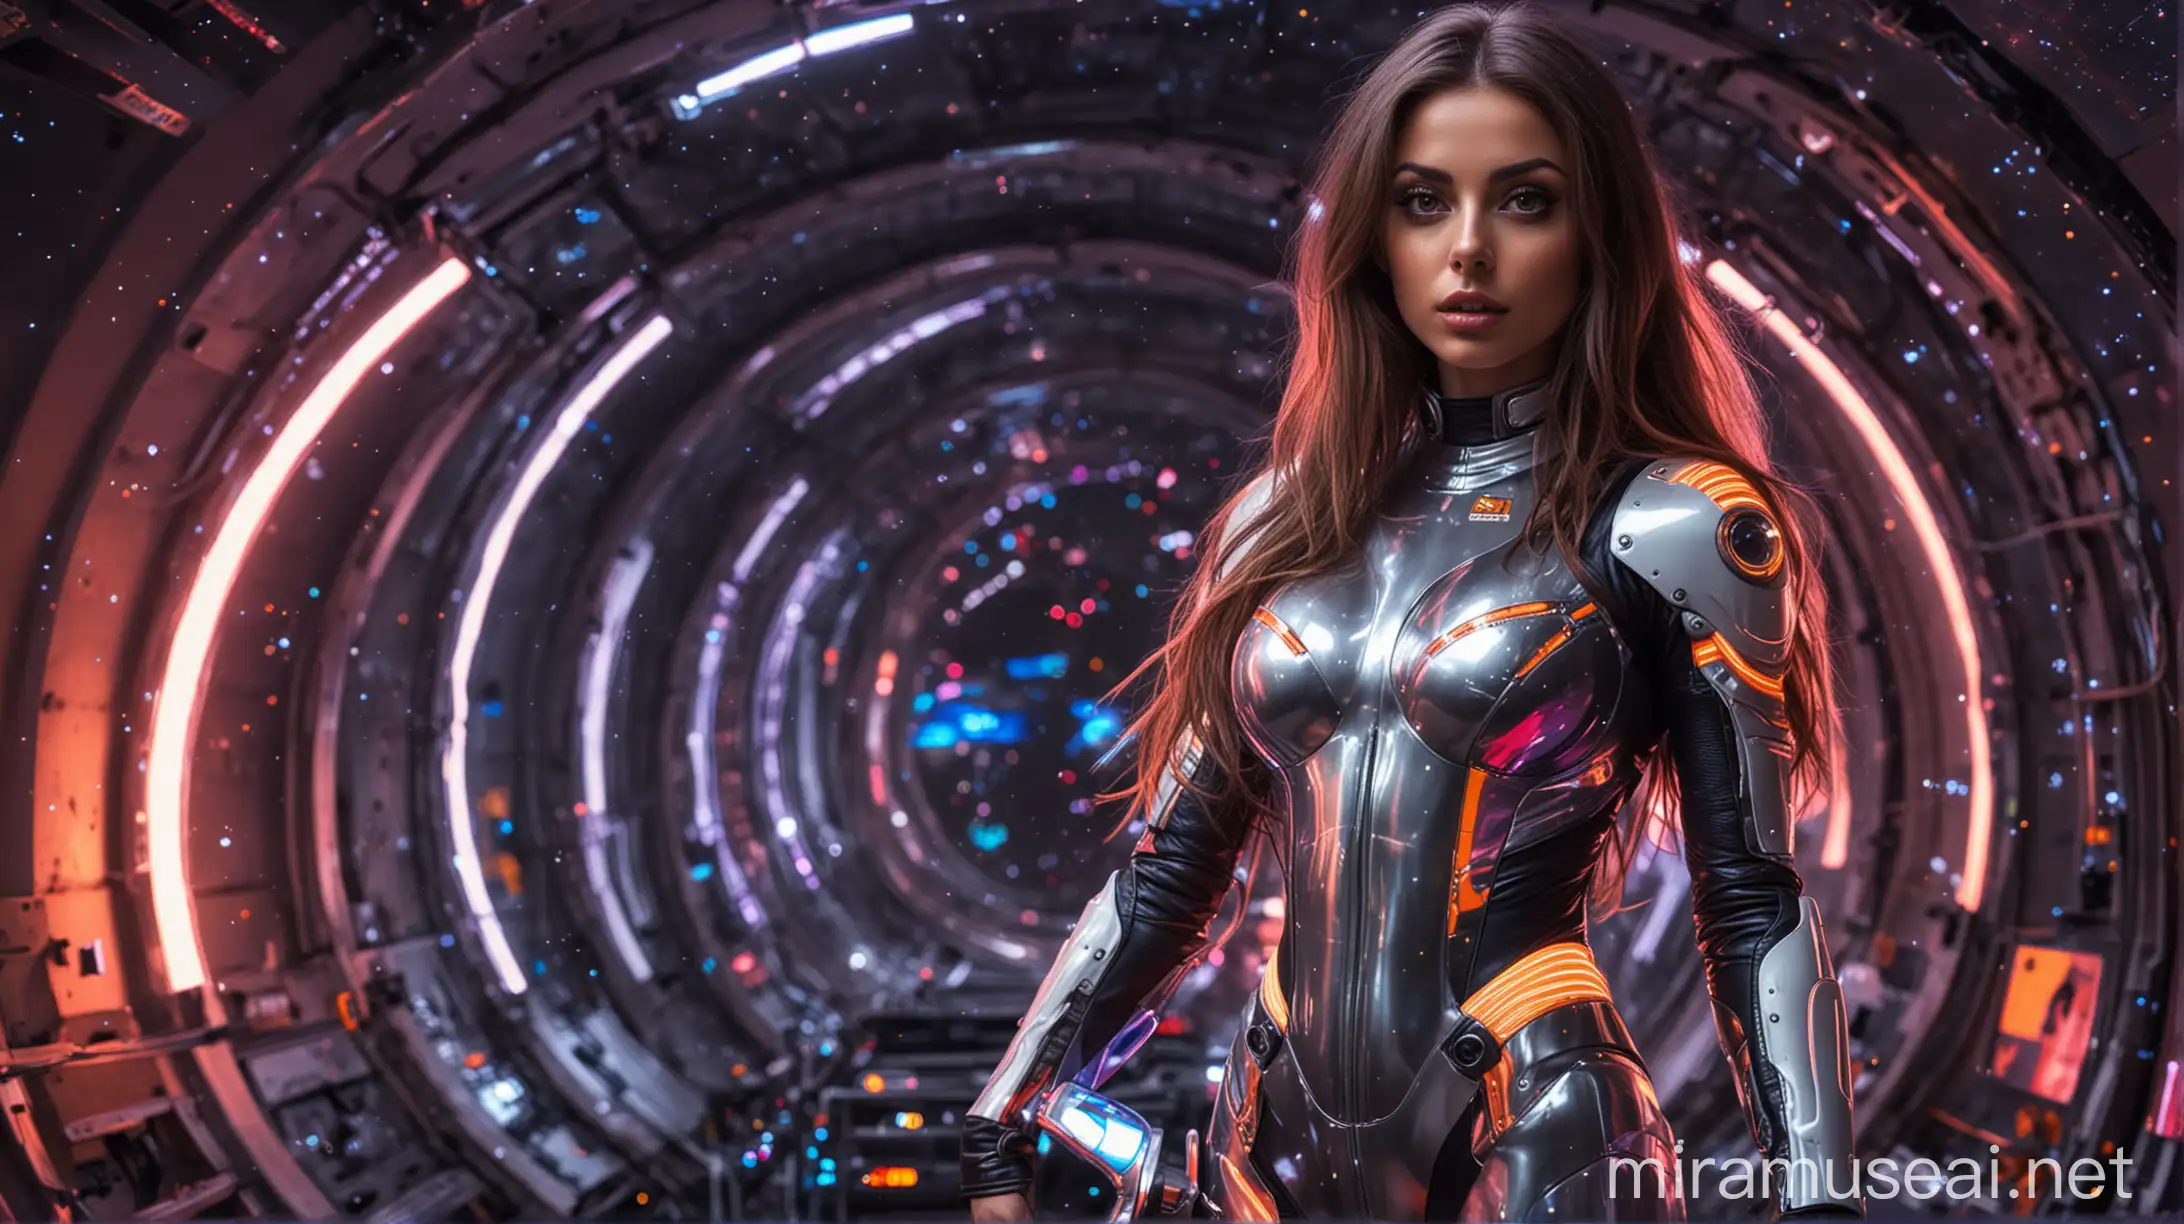 neon colors and light, italian girl, sexy makeup, big eyes and lips, slim, long hair, wild hair, full body, fitness model, big boobs, wide hips, huge tits, tight spacesuit, armored spacesuit, colorful spacesuit, glowing parts of spacesuit, futuristic planet, stars, planets, galaxies